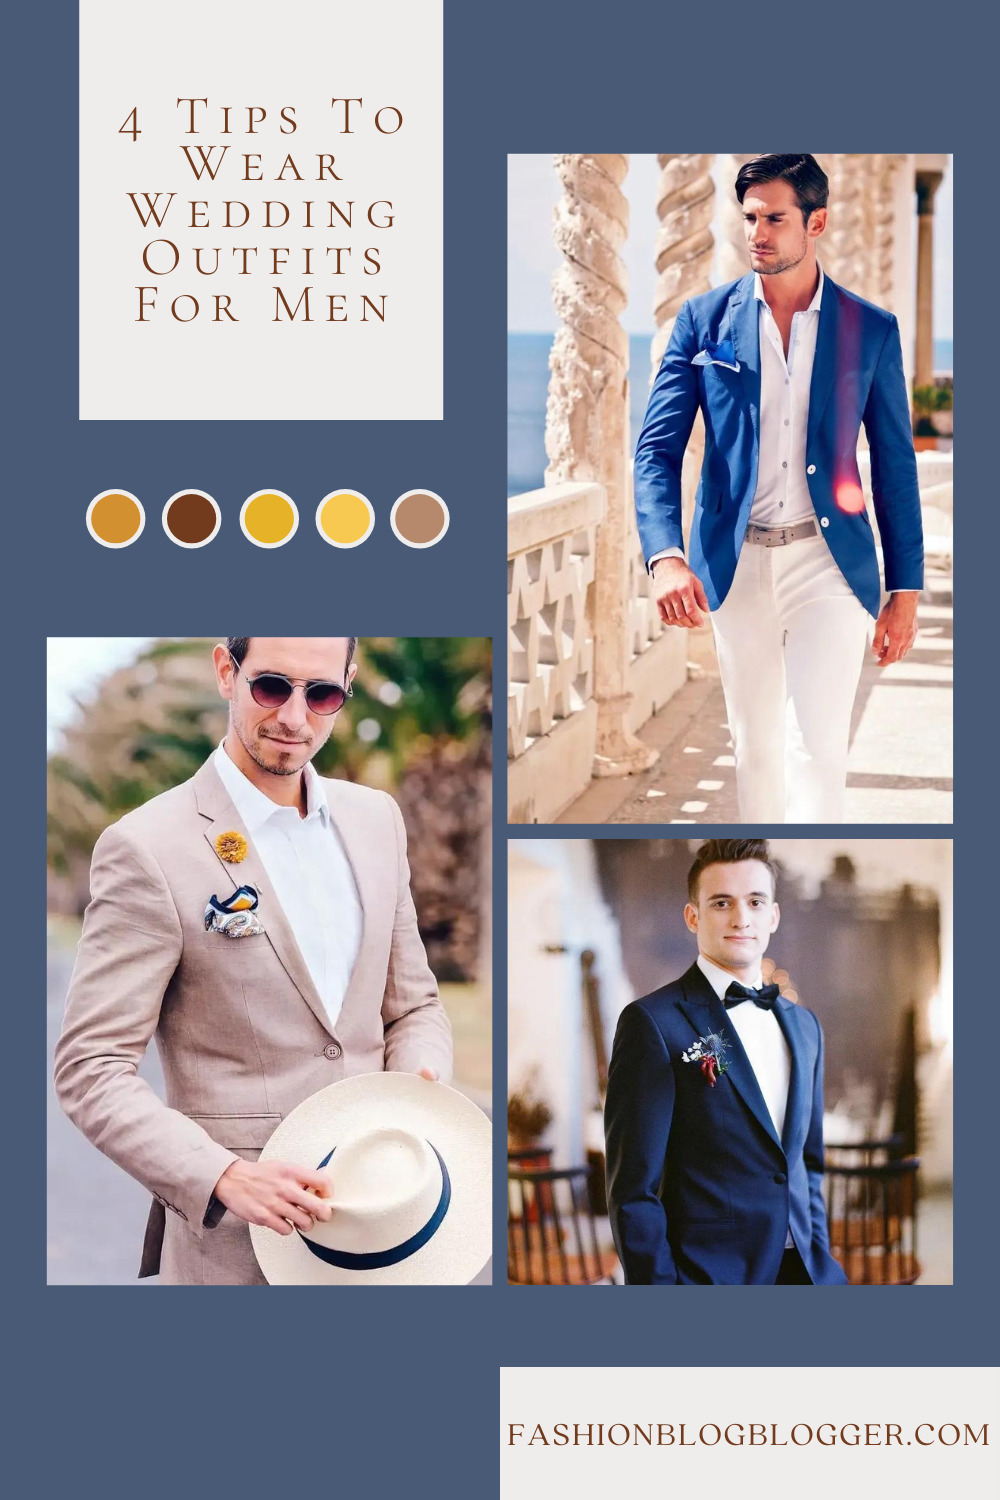 4 Tips To Wear Wedding Outfits For Men